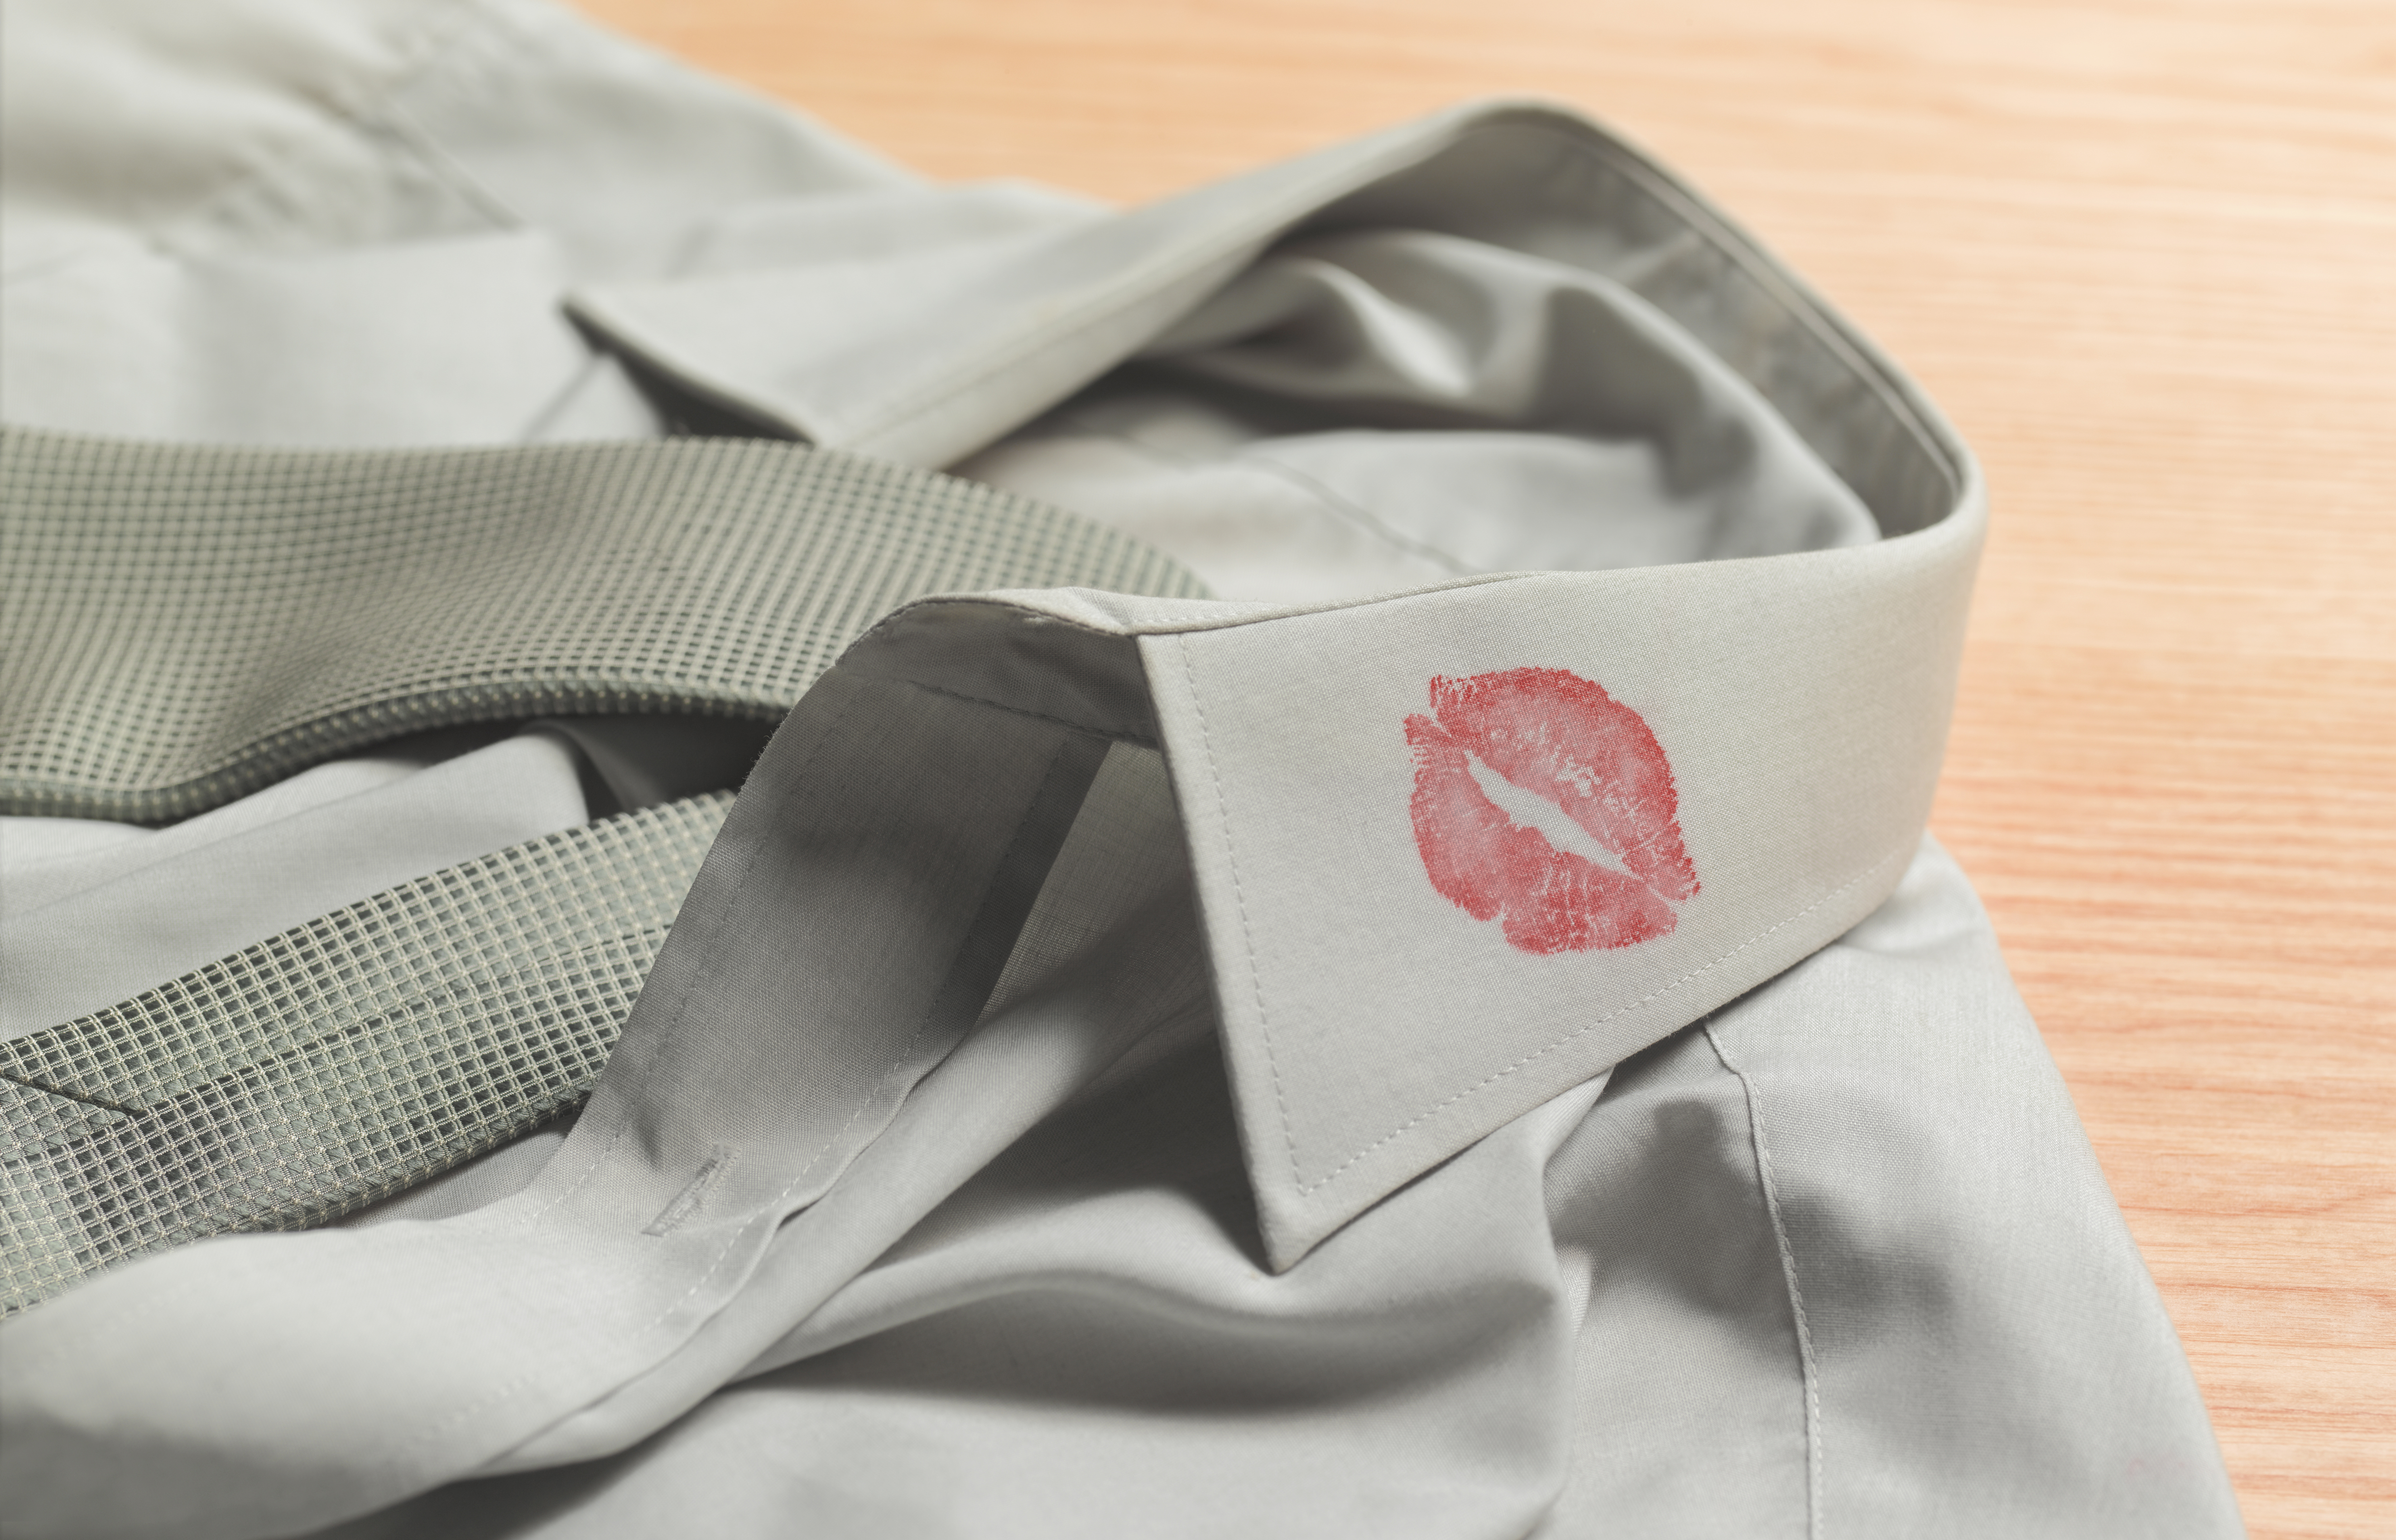 A shirt with a lipstick stain on the collar | Source: Getty Images